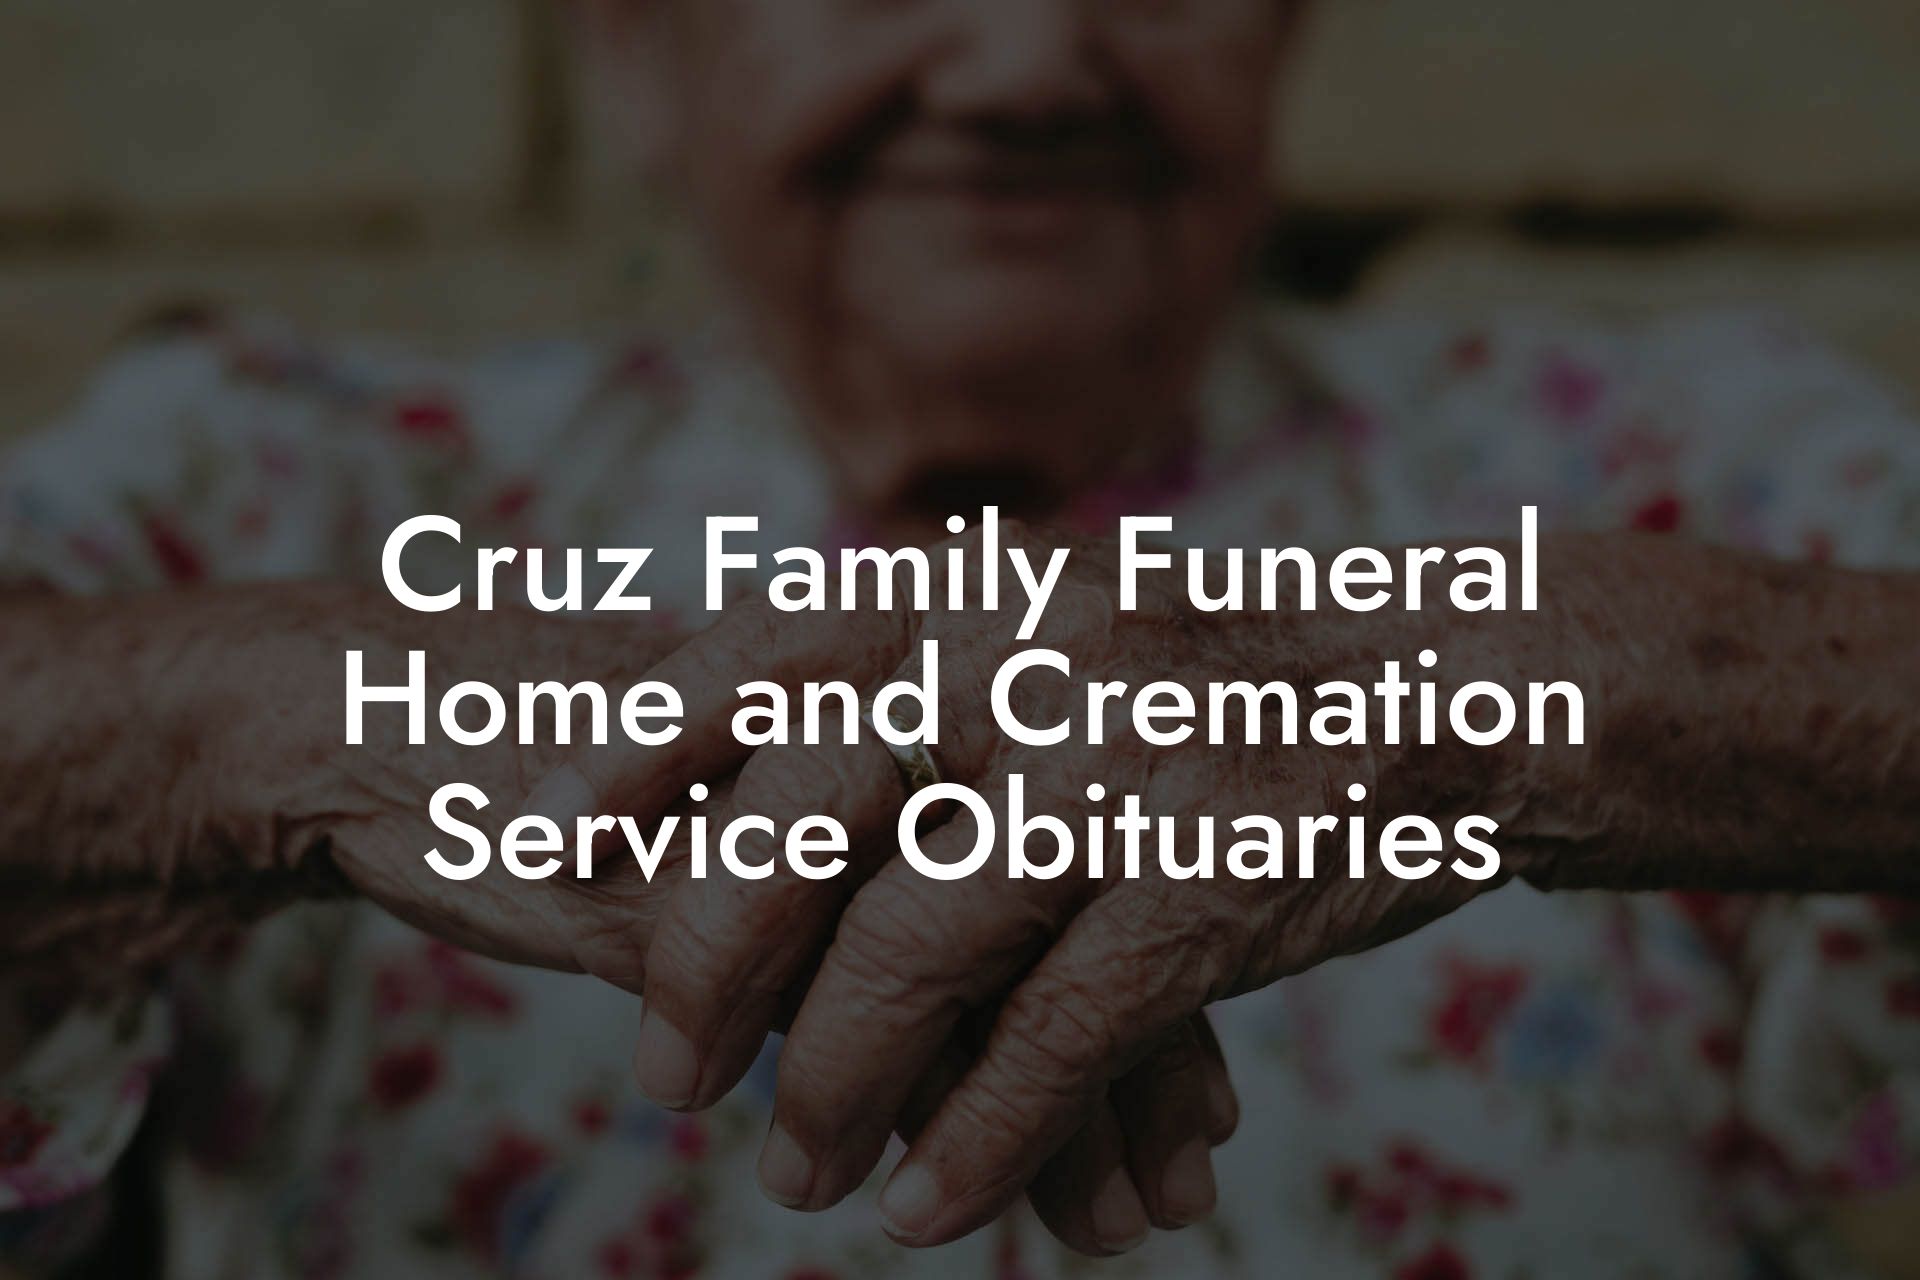 Cruz Family Funeral Home and Cremation Service Obituaries